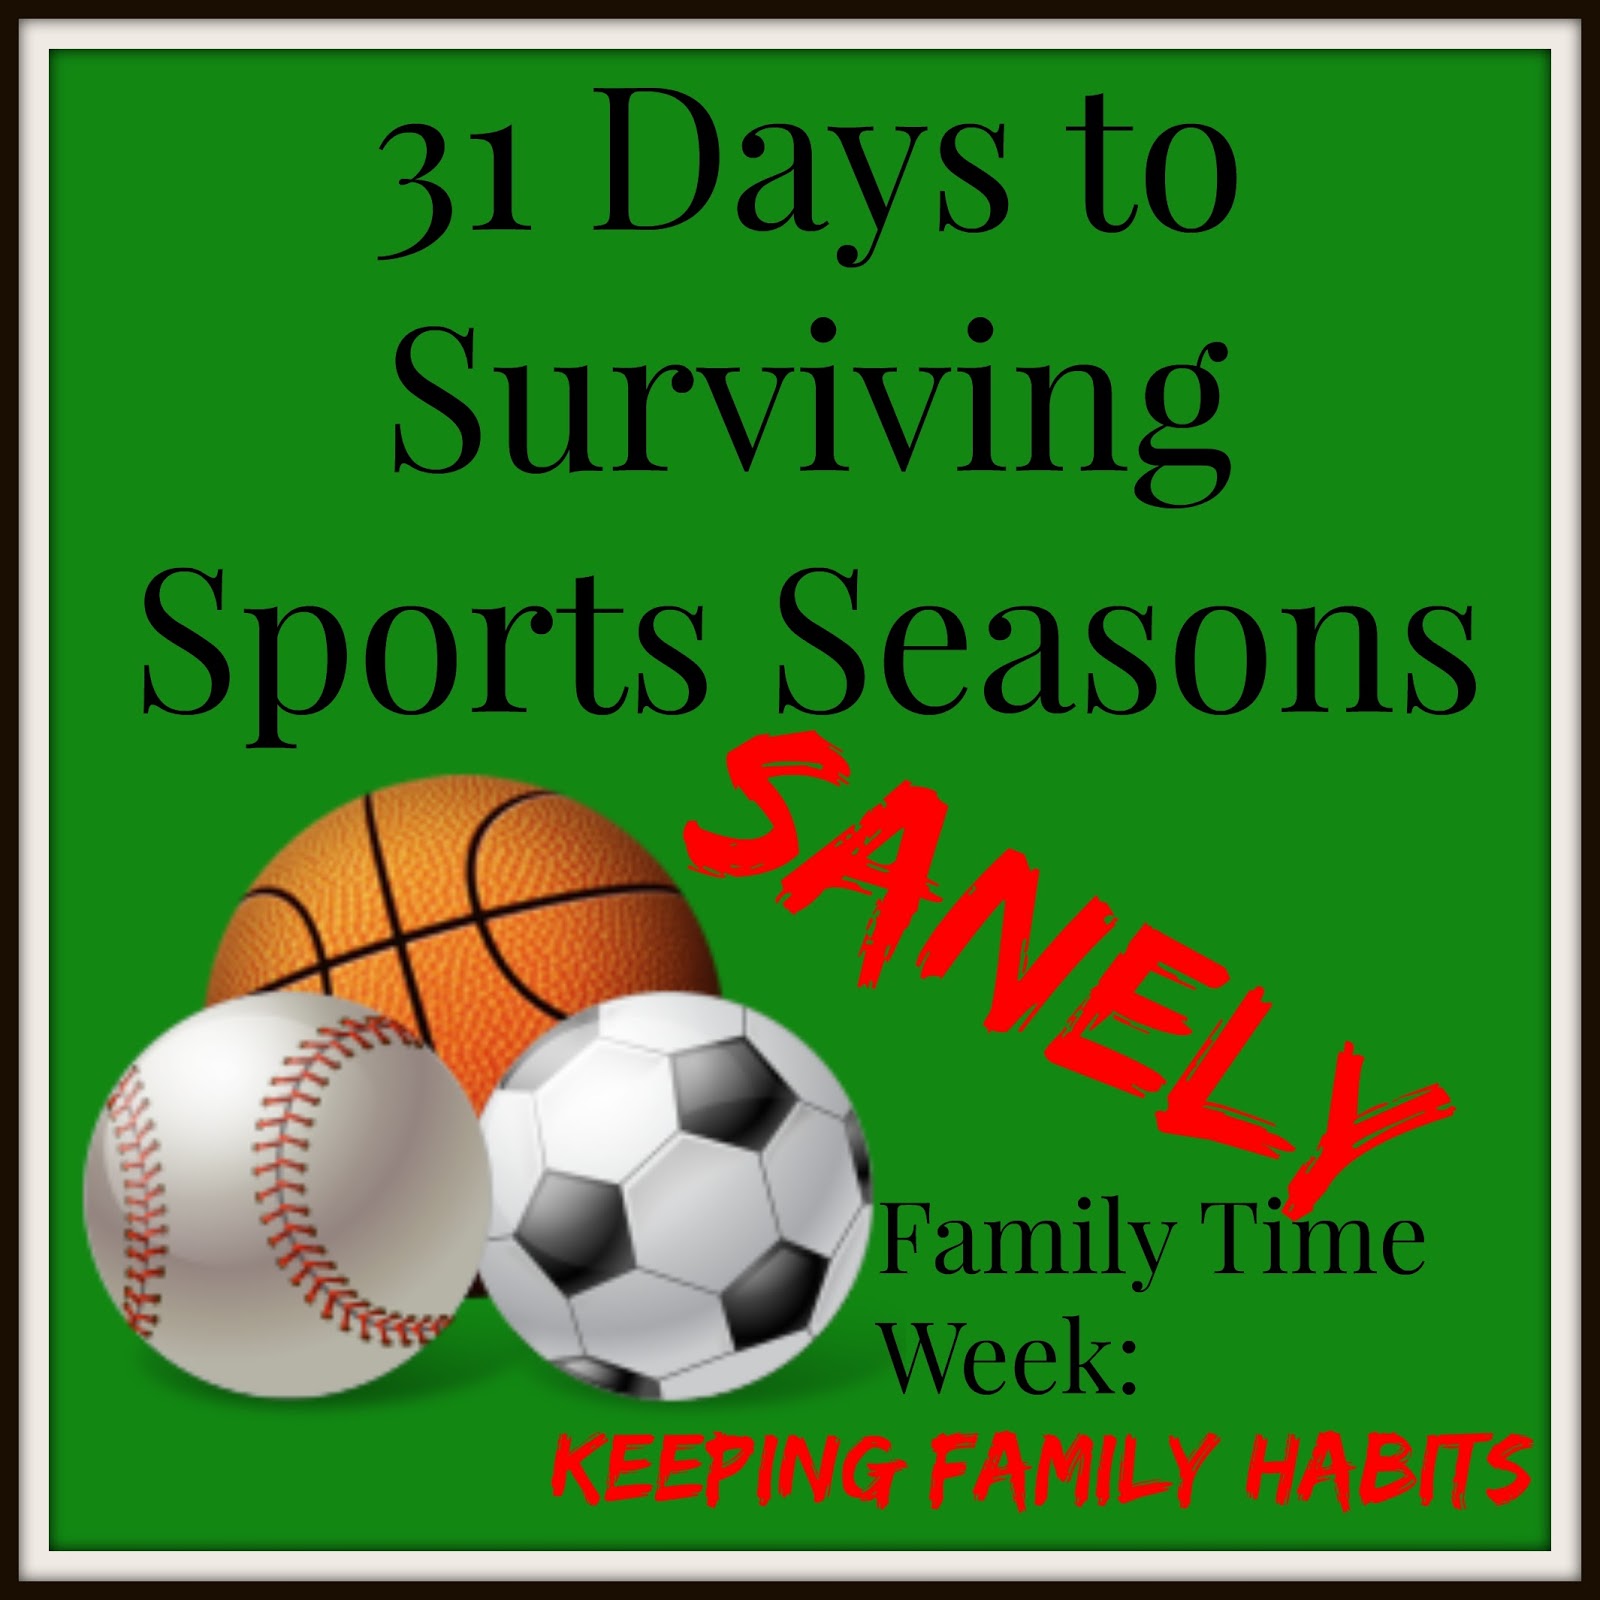 31 Days to Surviving Sports Seasons Sanely: Keeping Family Habits